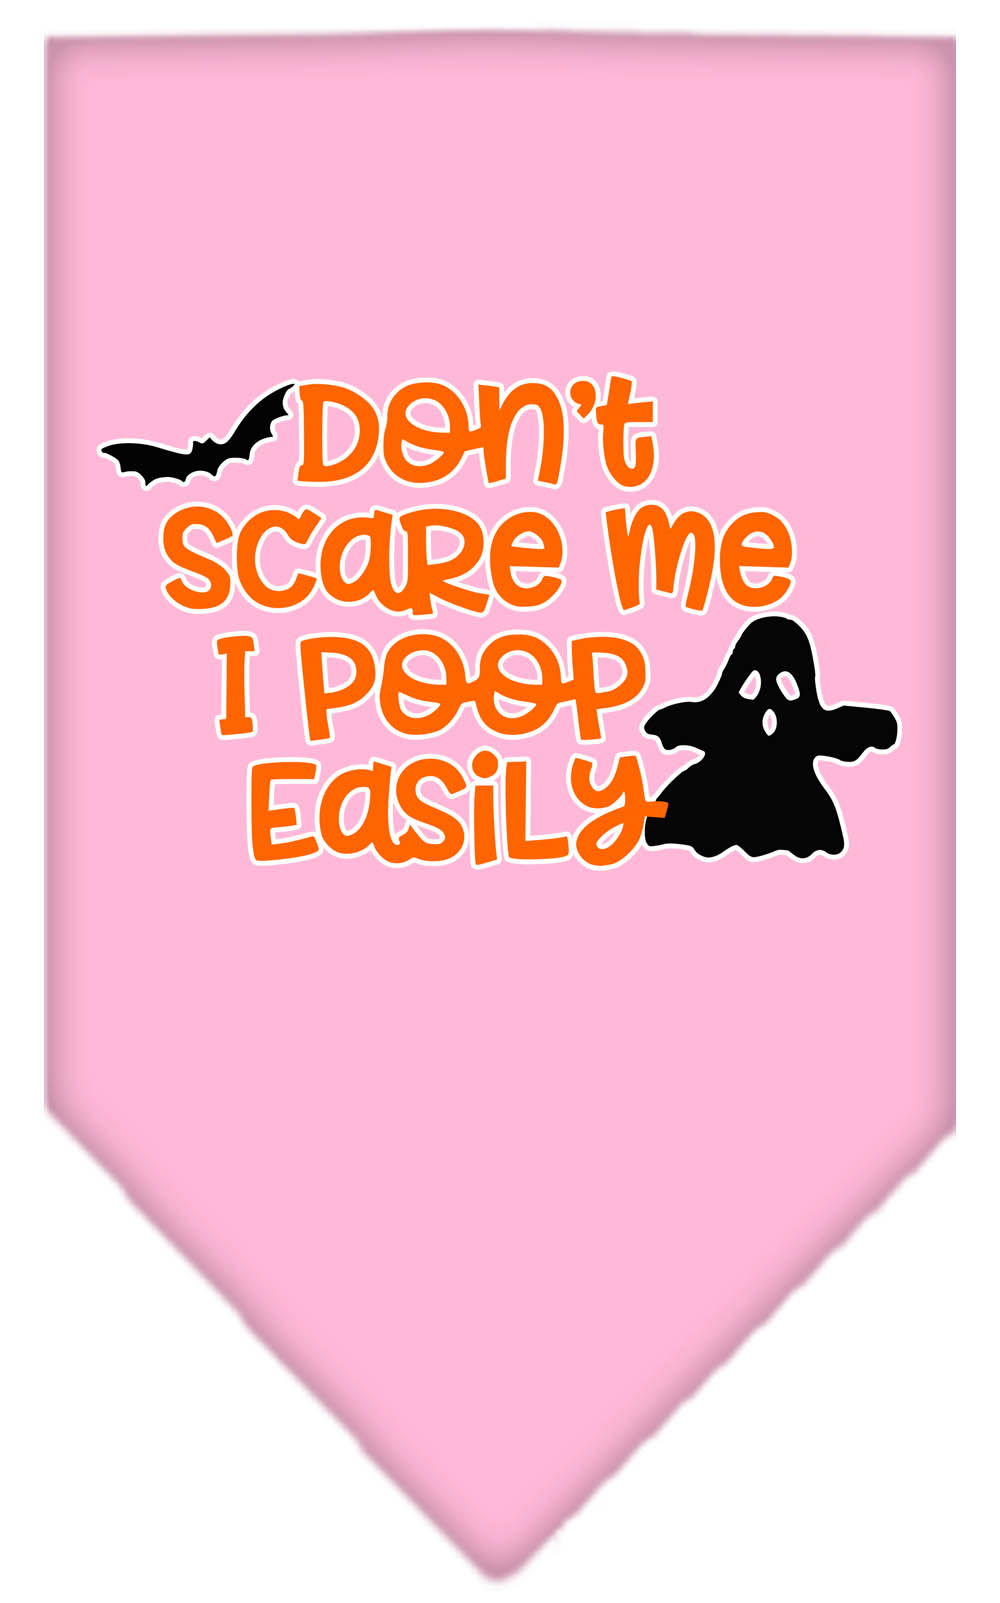 Don't Scare Me, Poops Easily Screen Print Bandana Light Pink Small